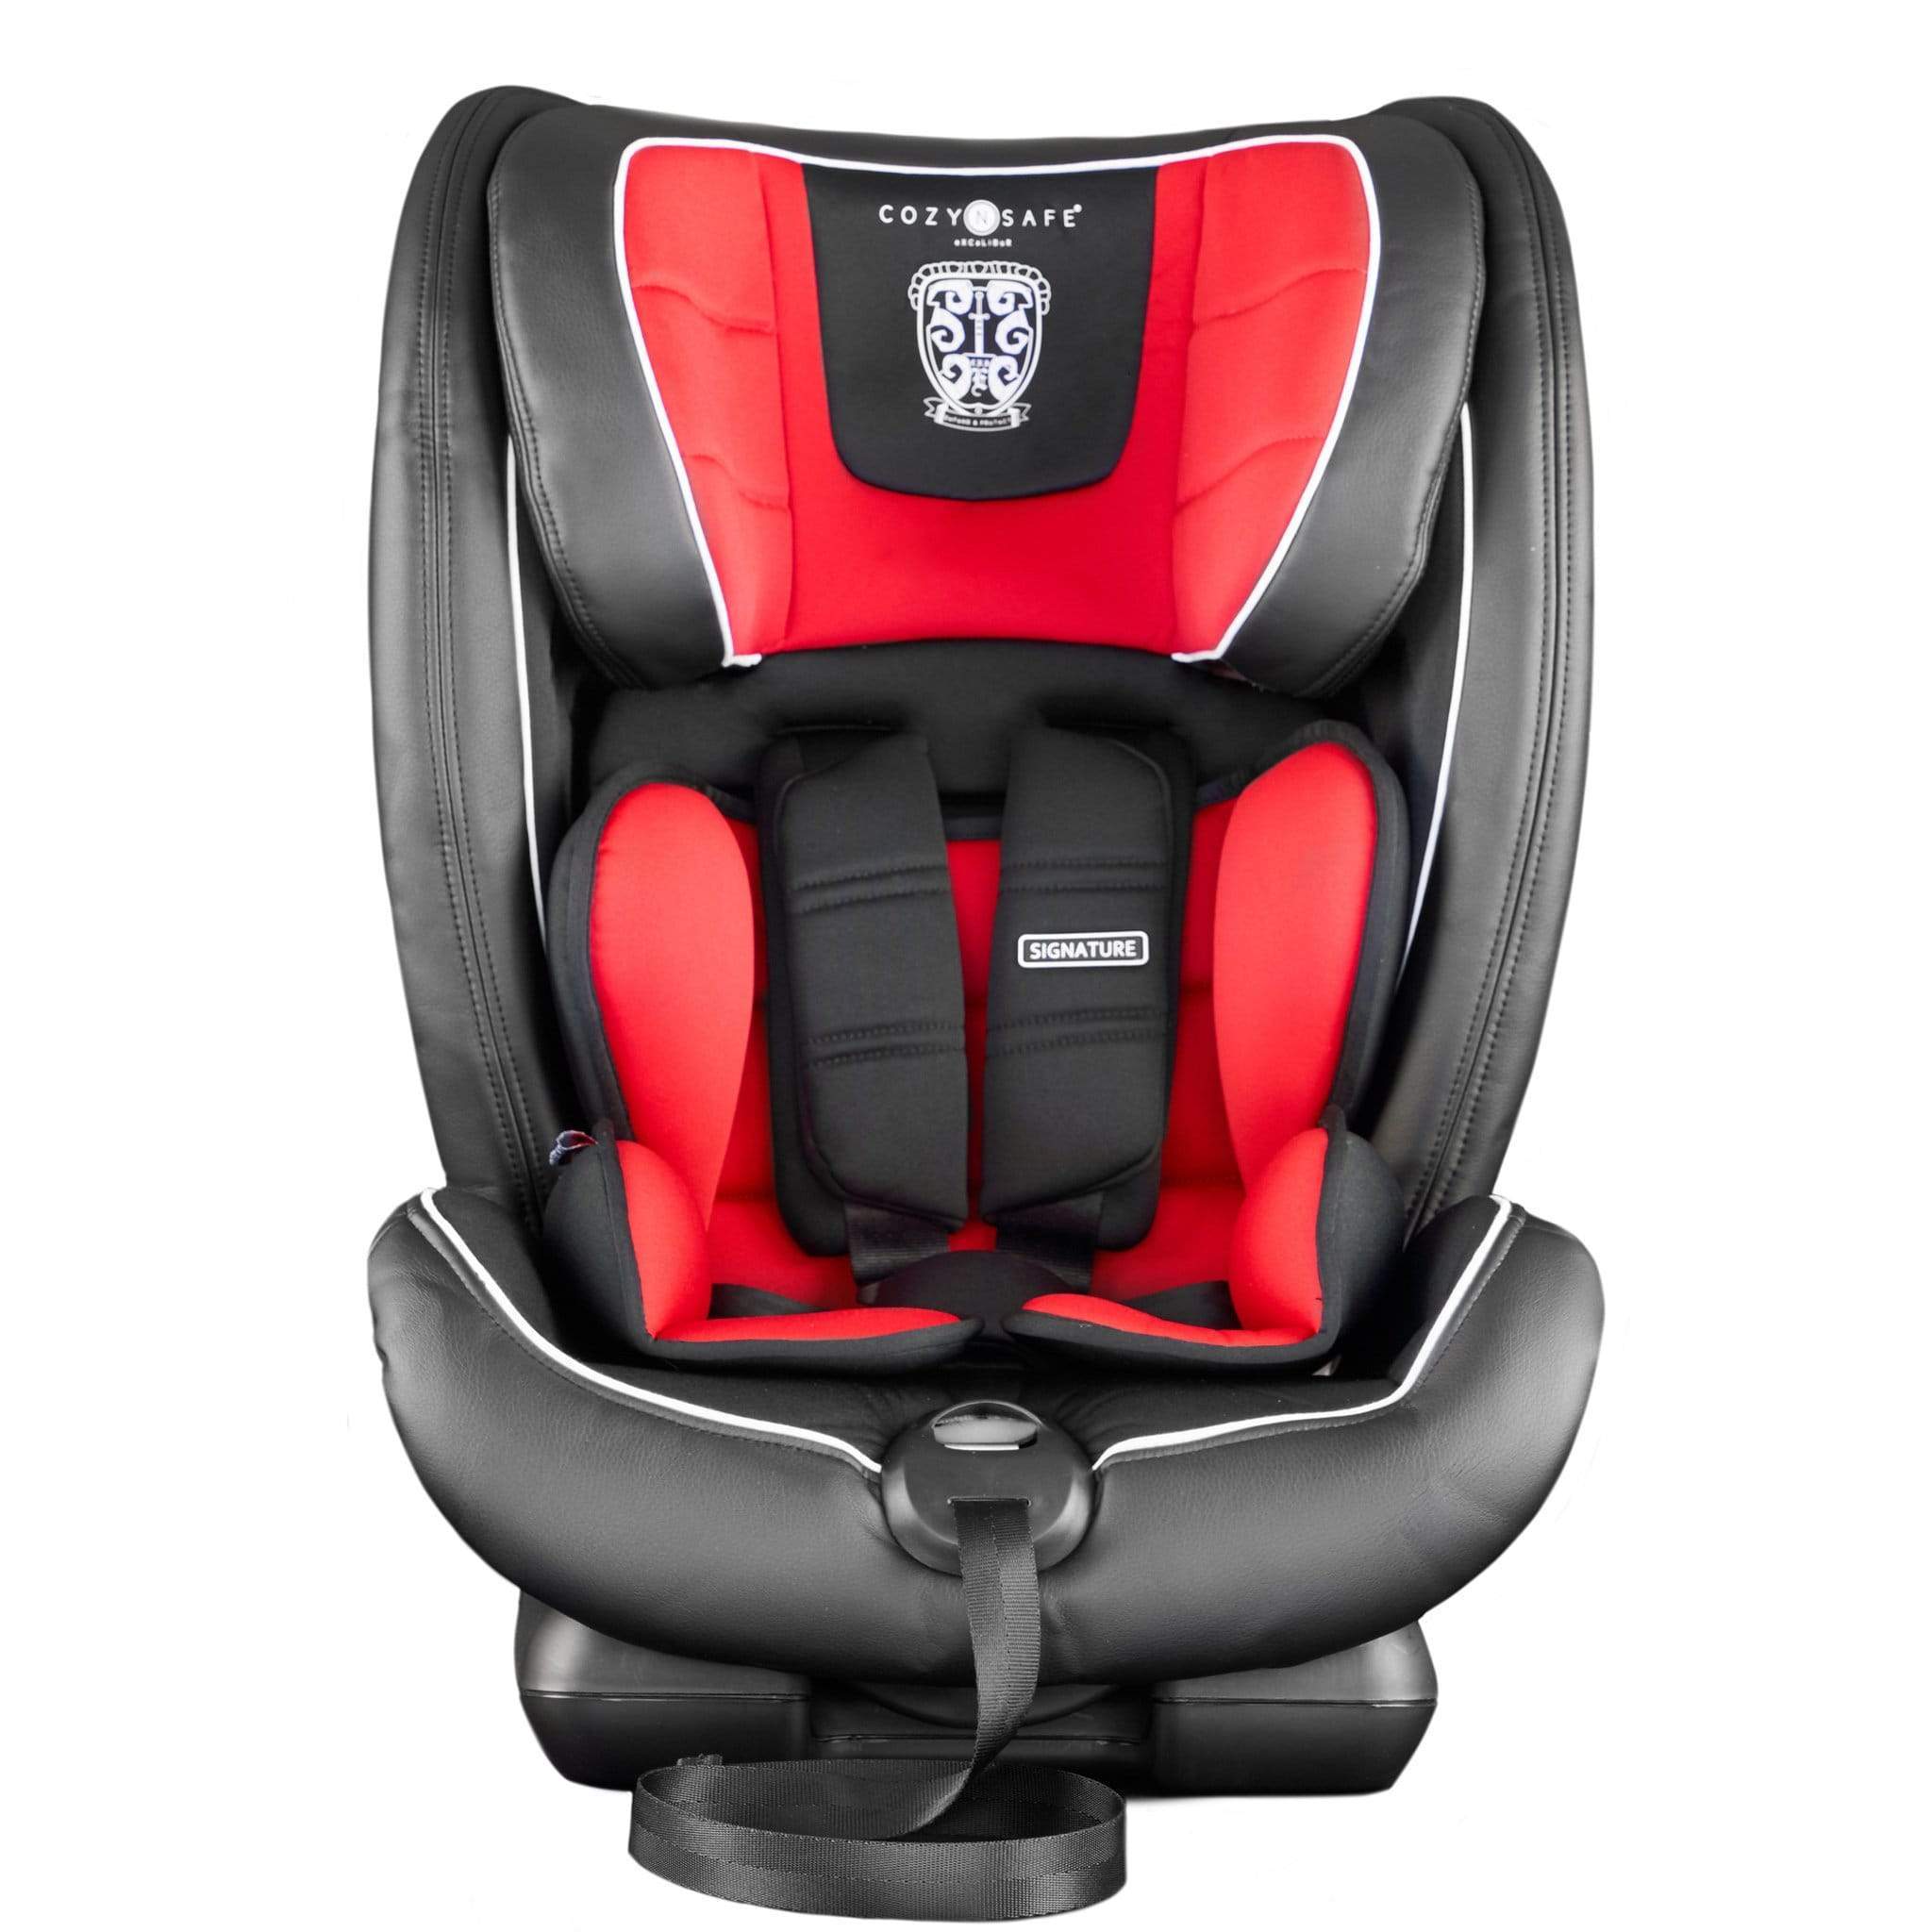 Cozy N Safe Car Seats The Cozy N Safe Excalibur Group 1/2/3 25kg Harness Car Seat in Black and Red EST-02-Excalibur